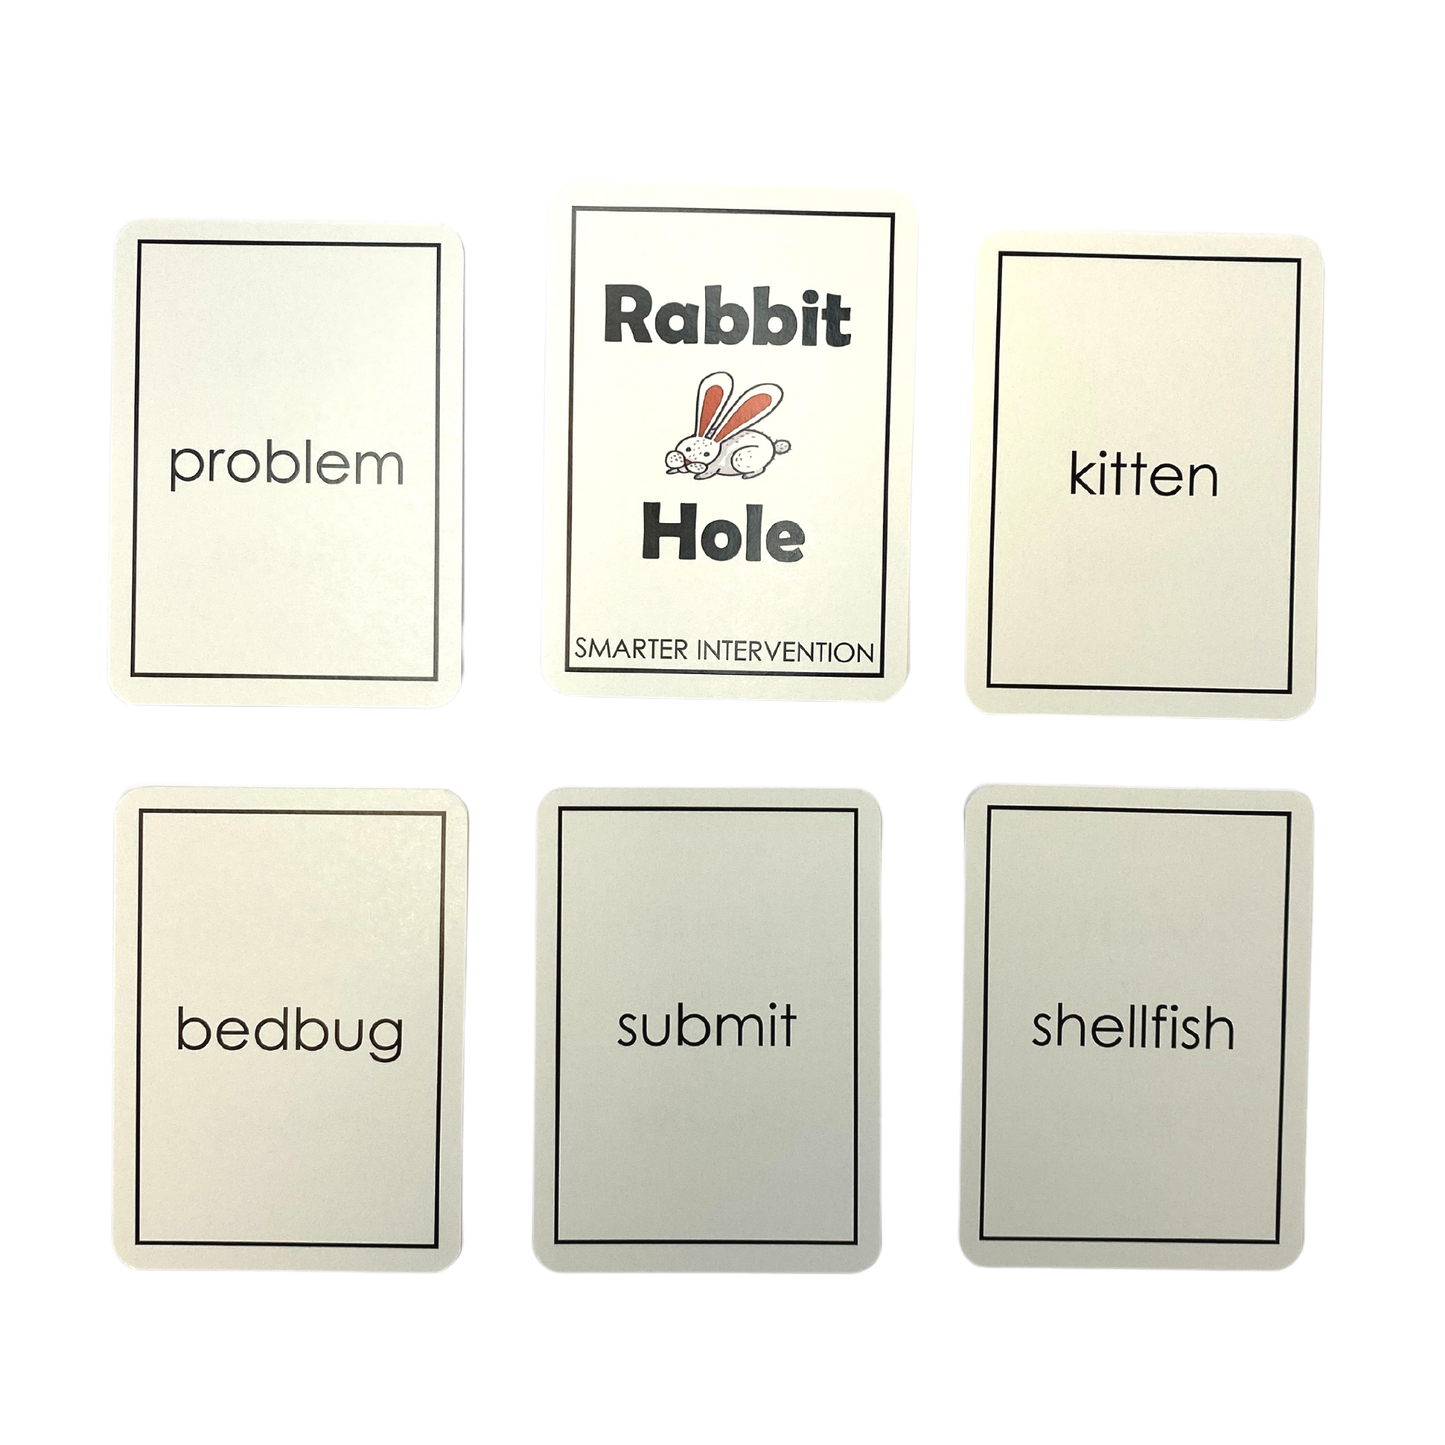 Use the Rabbit Division game cards as a syllable division review drill in small group interventions or as a literacy center activity. This game helps students strengthen their reading skills, build their vocabulary, and improve their comprehension in a fun and interactive way. It is designed to reinforce key concepts in a way that is engaging and memorable.